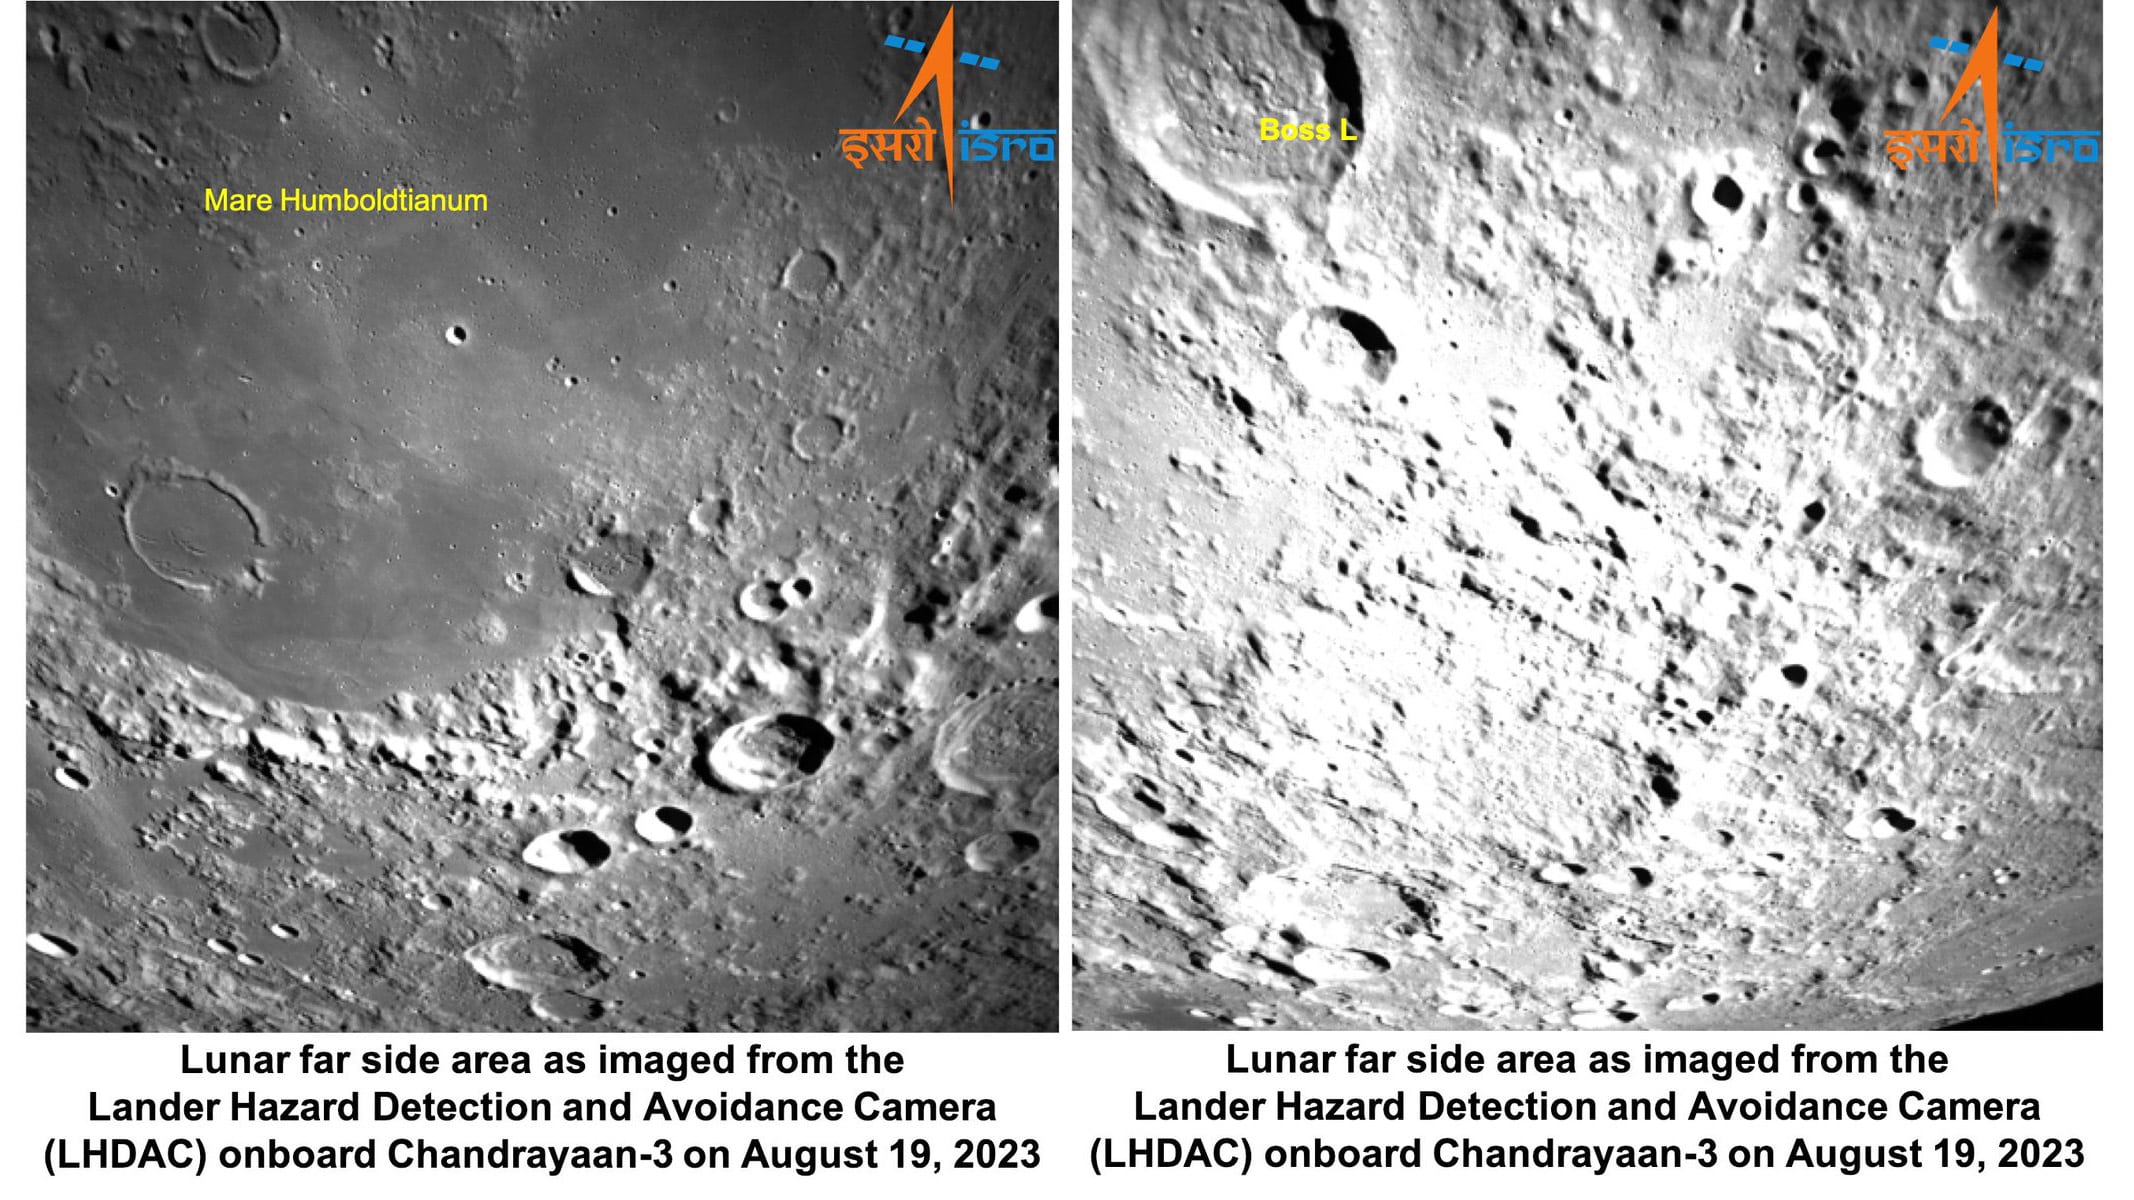 the images of Lunar far side area